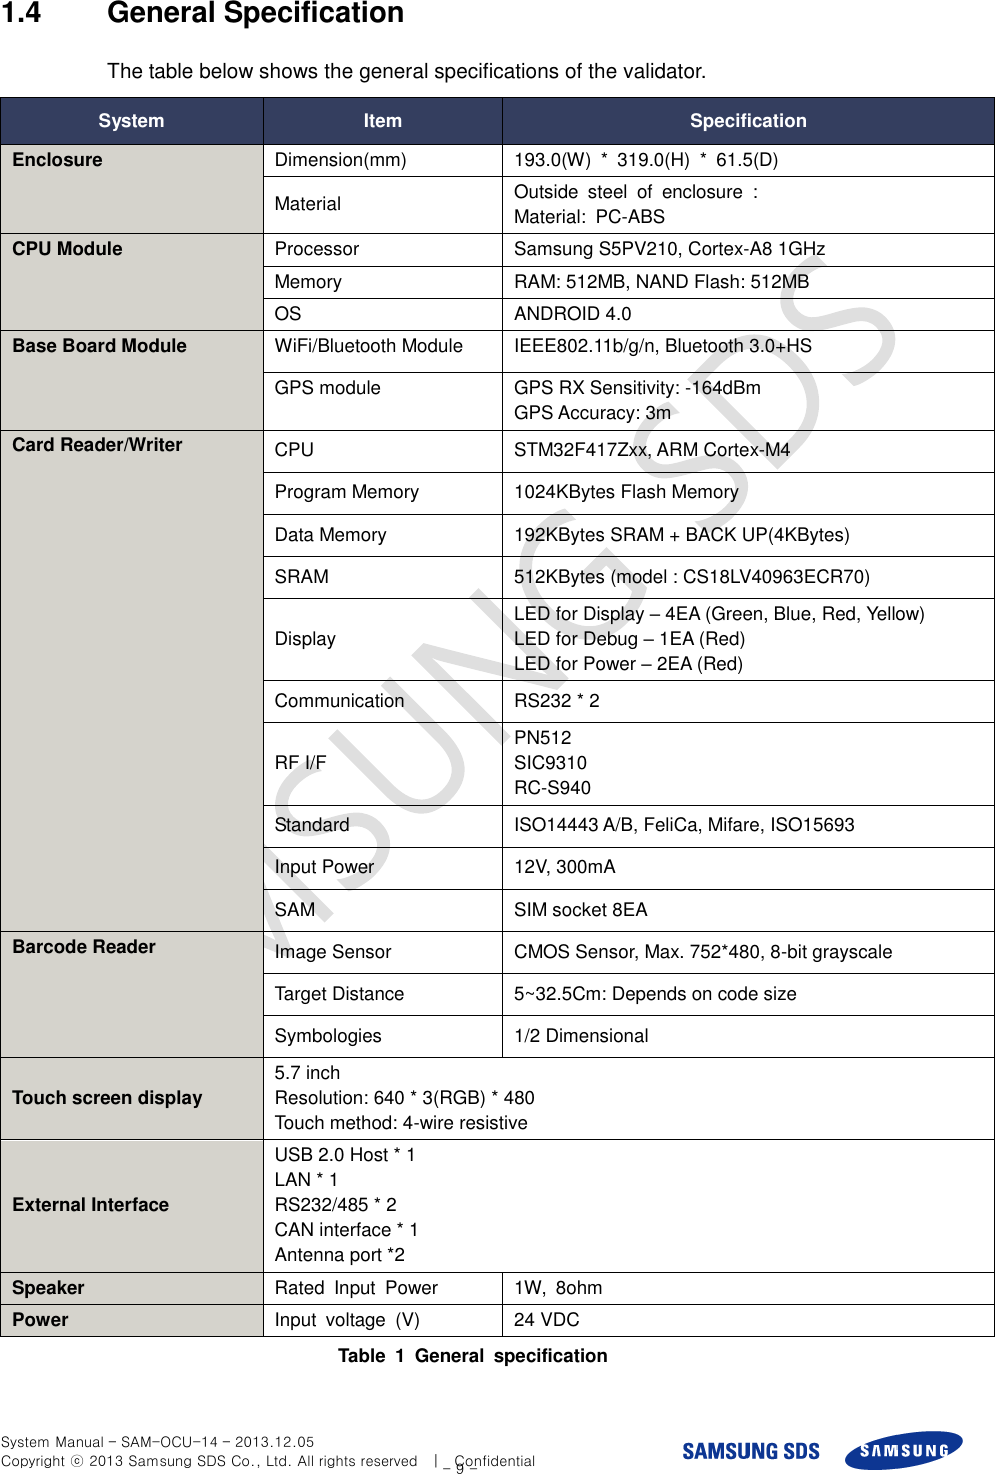  System Manual – SAM-OCU-14 – 2013.12.05 Copyright ⓒ 2013 Samsung SDS Co., Ltd. All rights reserved    |    Confidential - 9 - 1.4  General Specification The table below shows the general specifications of the validator. System Item Specification Enclosure Dimension(mm) 193.0(W)  *  319.0(H)  *  61.5(D) Material Outside  steel  of  enclosure  : Material:  PC-ABS   CPU Module Processor Samsung S5PV210, Cortex-A8 1GHz Memory RAM: 512MB, NAND Flash: 512MB OS ANDROID 4.0 Base Board Module WiFi/Bluetooth Module IEEE802.11b/g/n, Bluetooth 3.0+HS GPS module GPS RX Sensitivity: -164dBm GPS Accuracy: 3m Card Reader/Writer CPU STM32F417Zxx, ARM Cortex-M4 Program Memory 1024KBytes Flash Memory   Data Memory 192KBytes SRAM + BACK UP(4KBytes) SRAM 512KBytes (model : CS18LV40963ECR70) Display LED for Display – 4EA (Green, Blue, Red, Yellow) LED for Debug – 1EA (Red) LED for Power – 2EA (Red) Communication RS232 * 2 RF I/F PN512 SIC9310 RC-S940 Standard ISO14443 A/B, FeliCa, Mifare, ISO15693 Input Power 12V, 300mA SAM SIM socket 8EA Barcode Reader Image Sensor CMOS Sensor, Max. 752*480, 8-bit grayscale Target Distance 5~32.5Cm: Depends on code size Symbologies 1/2 Dimensional Touch screen display 5.7 inch Resolution: 640 * 3(RGB) * 480 Touch method: 4-wire resistive External Interface USB 2.0 Host * 1 LAN * 1 RS232/485 * 2 CAN interface * 1 Antenna port *2 Speaker Rated  Input  Power 1W,  8ohm Power Input  voltage  (V) 24 VDC Table  1  General  specification 